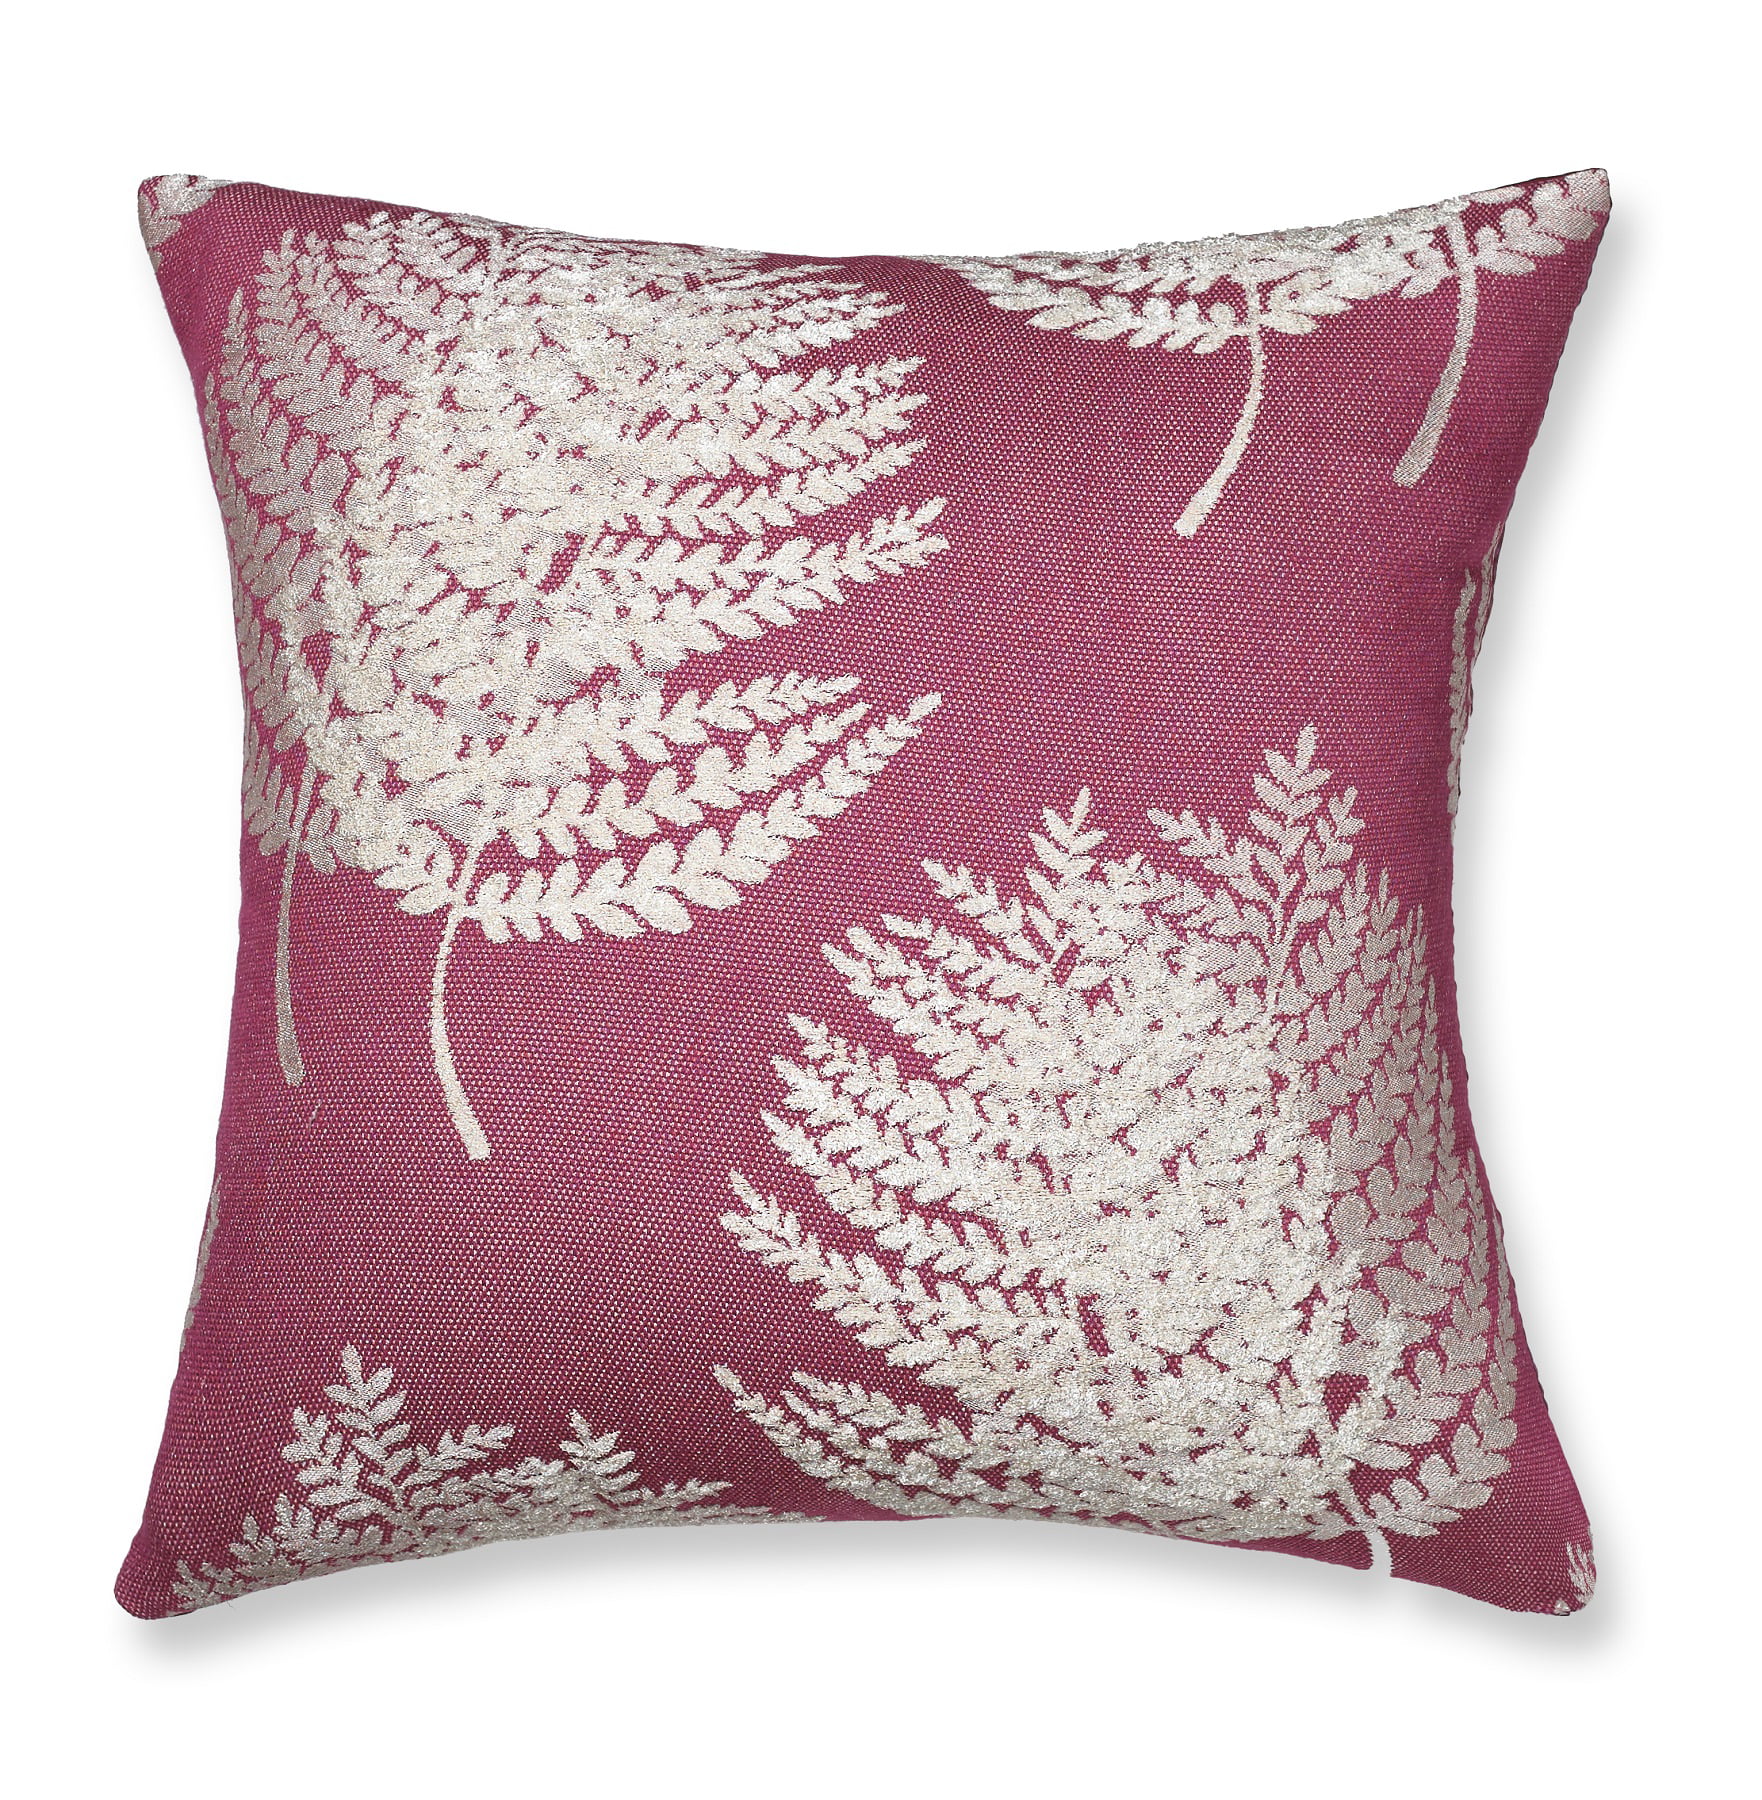 CUSHION COVERS PLUM FAWN BROWN BURGUNDY BEIGE FLOWER LEAVES PILLOW COVERS 